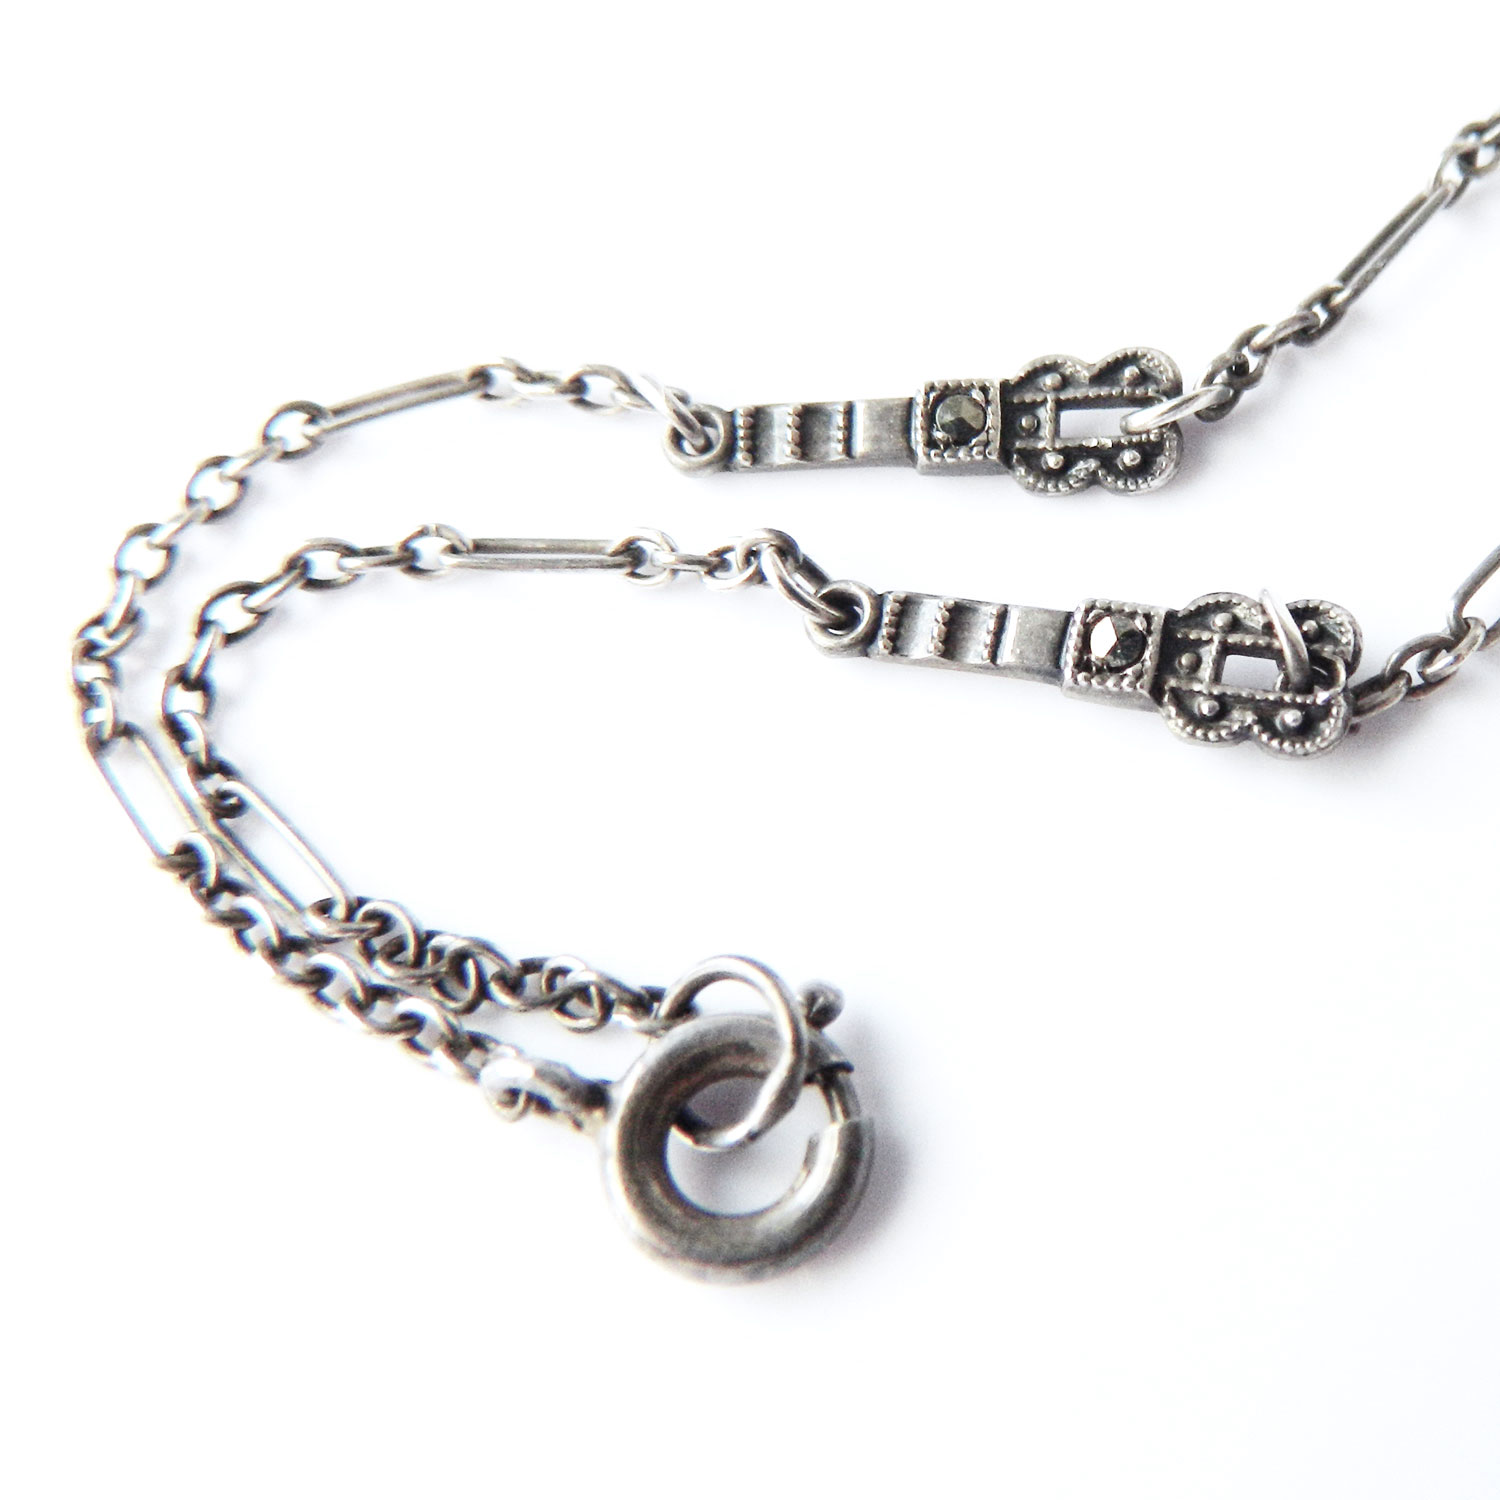 Sterling silver necklace